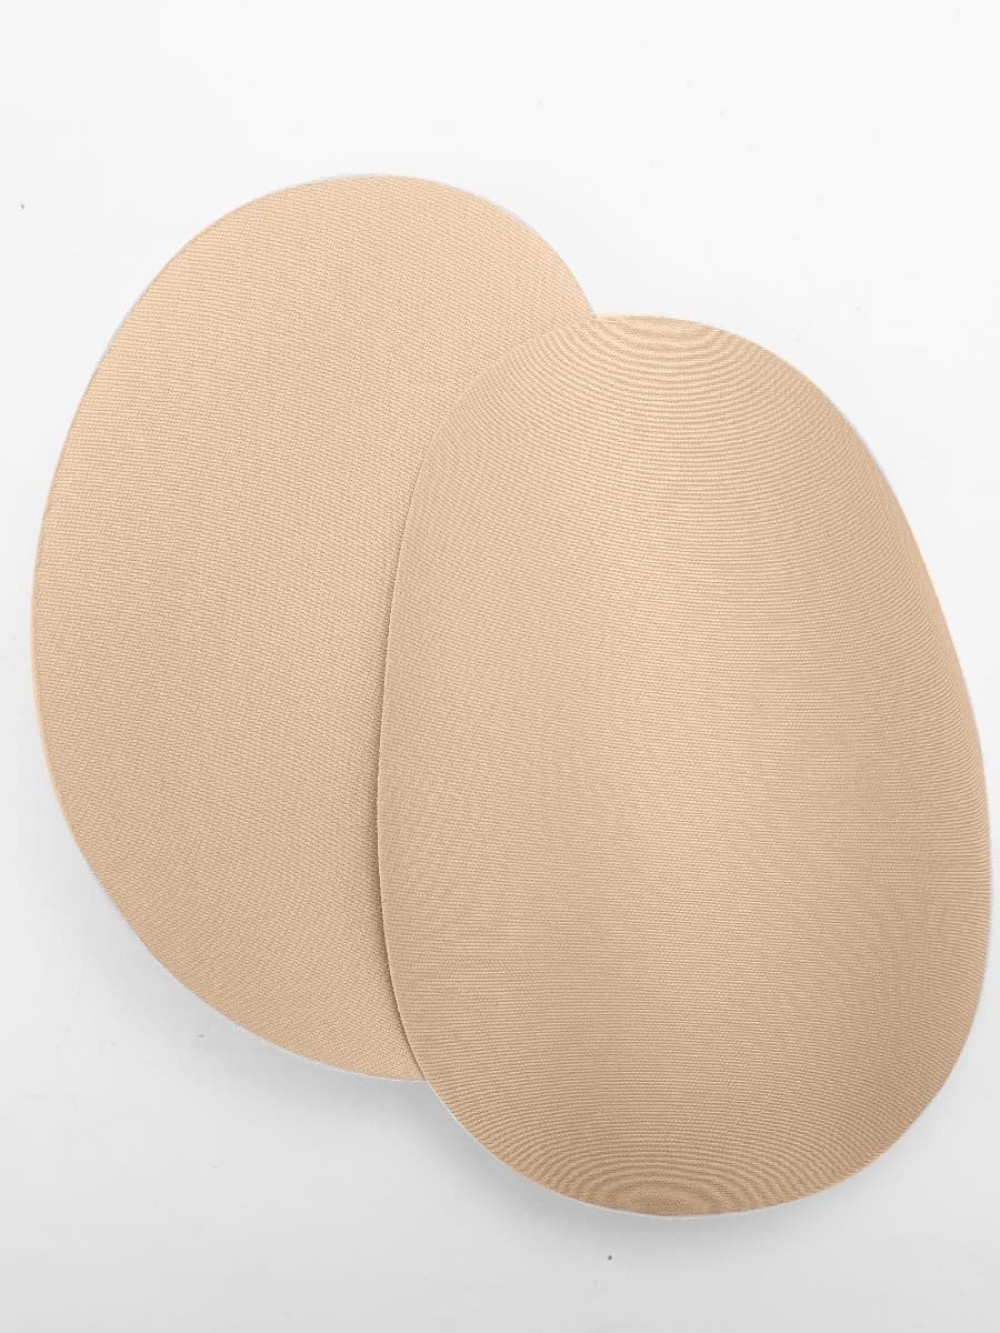 Low-cut Back Body Shaper with Built-in Removable Buttocks and Crotch Pads